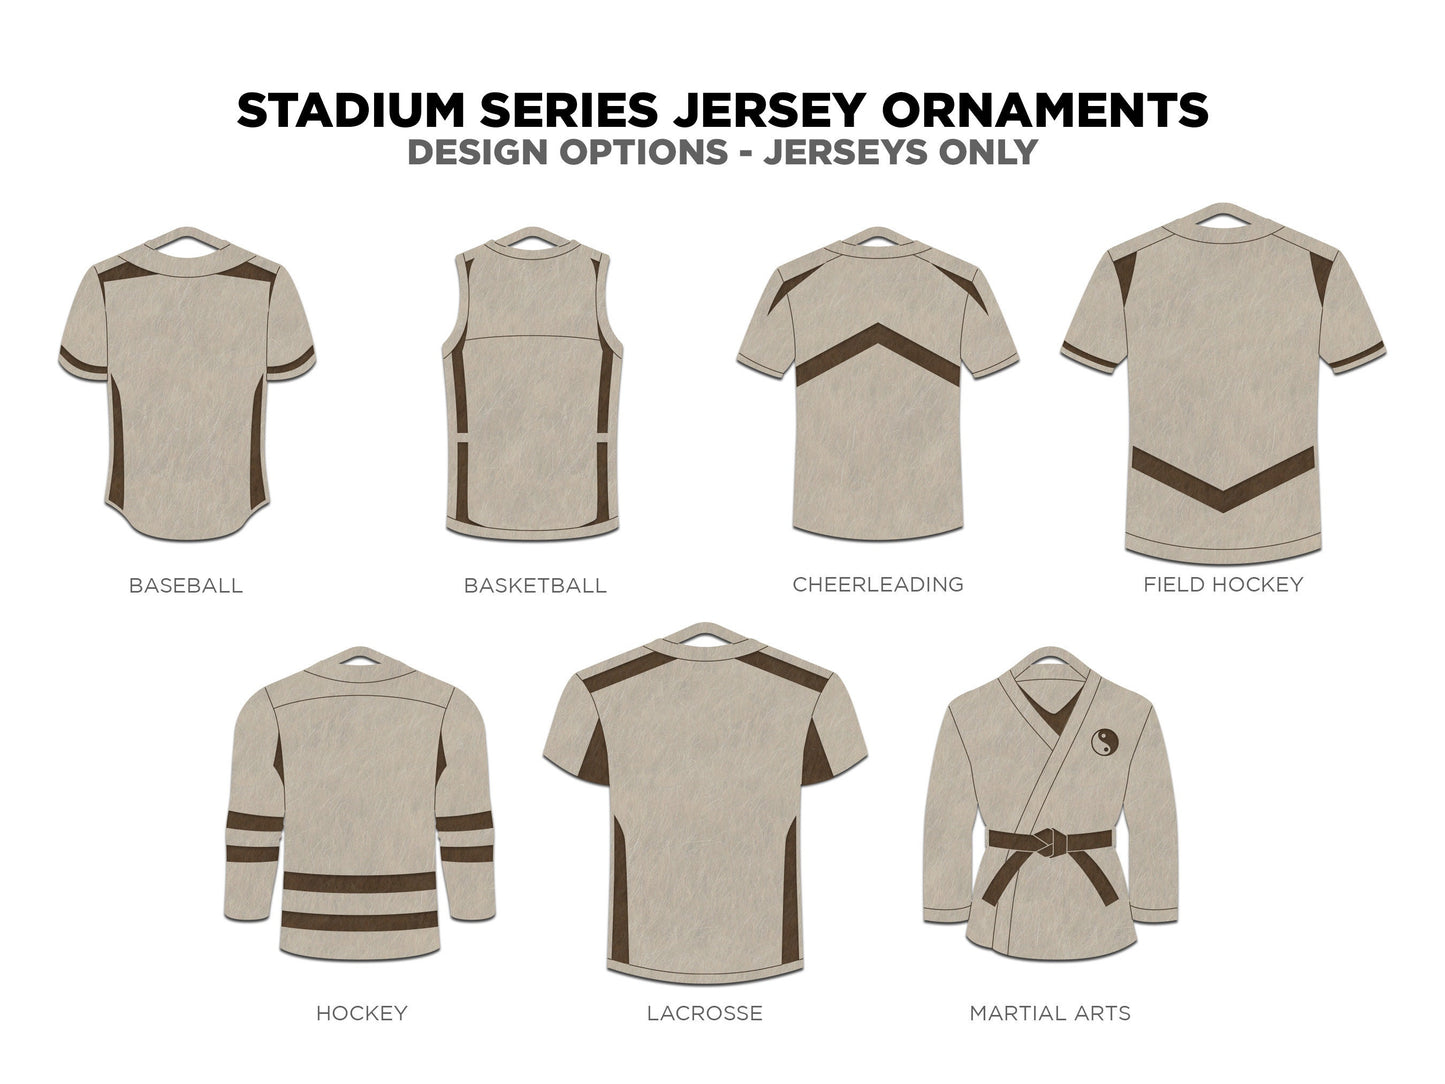 Stadium Series Jersey Ornaments - 15 Sports - 2 Variations for Each - SVG Files -Glowforge & Lightburn Tested